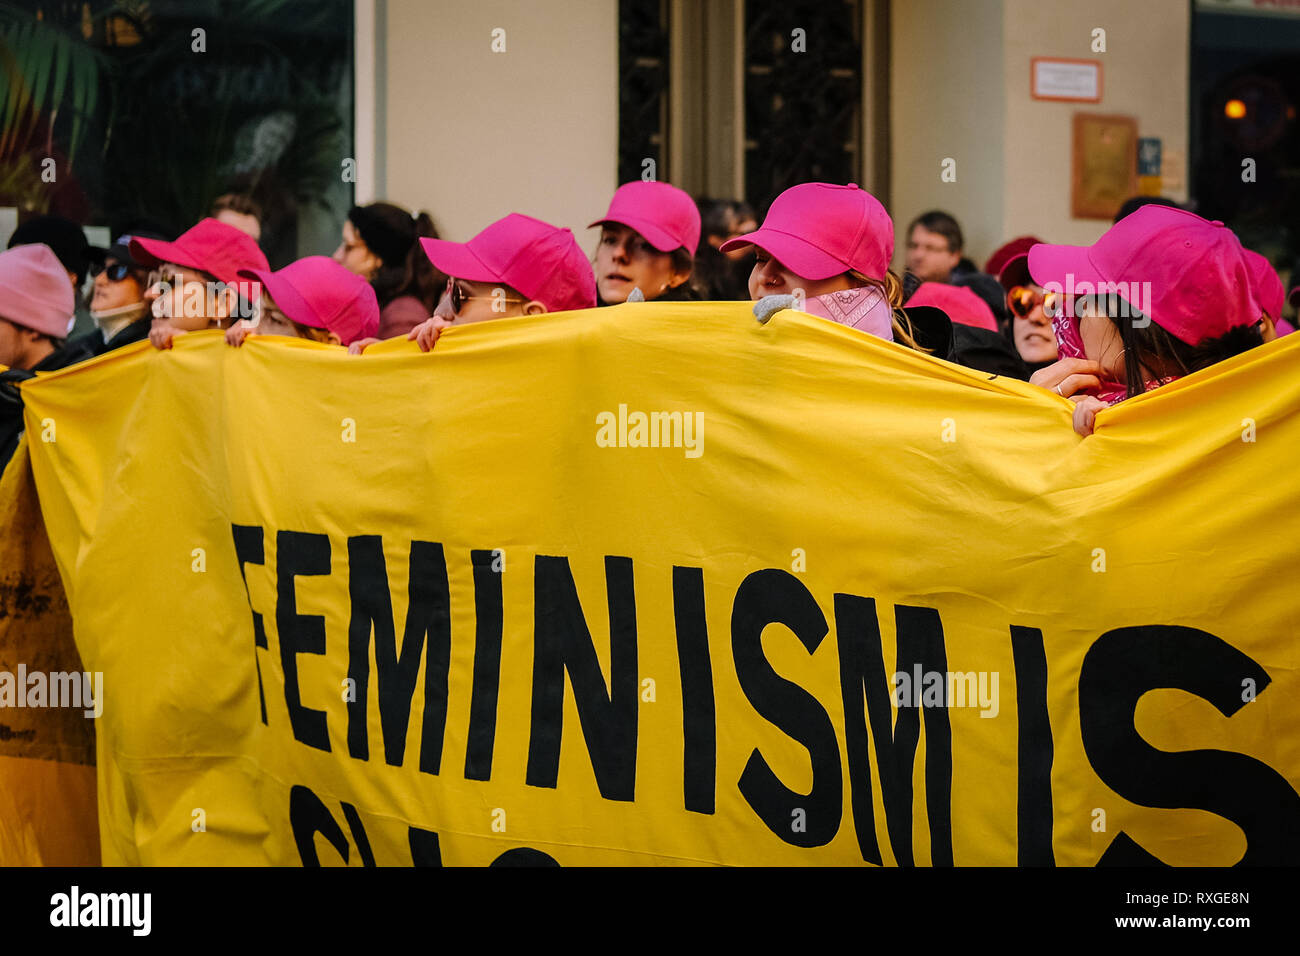 Women wearing pink caps are seen holding a banner during the protest. Thousands of people celebrate the international women´s day with protests demanding for women rights in berlin. Stock Photo